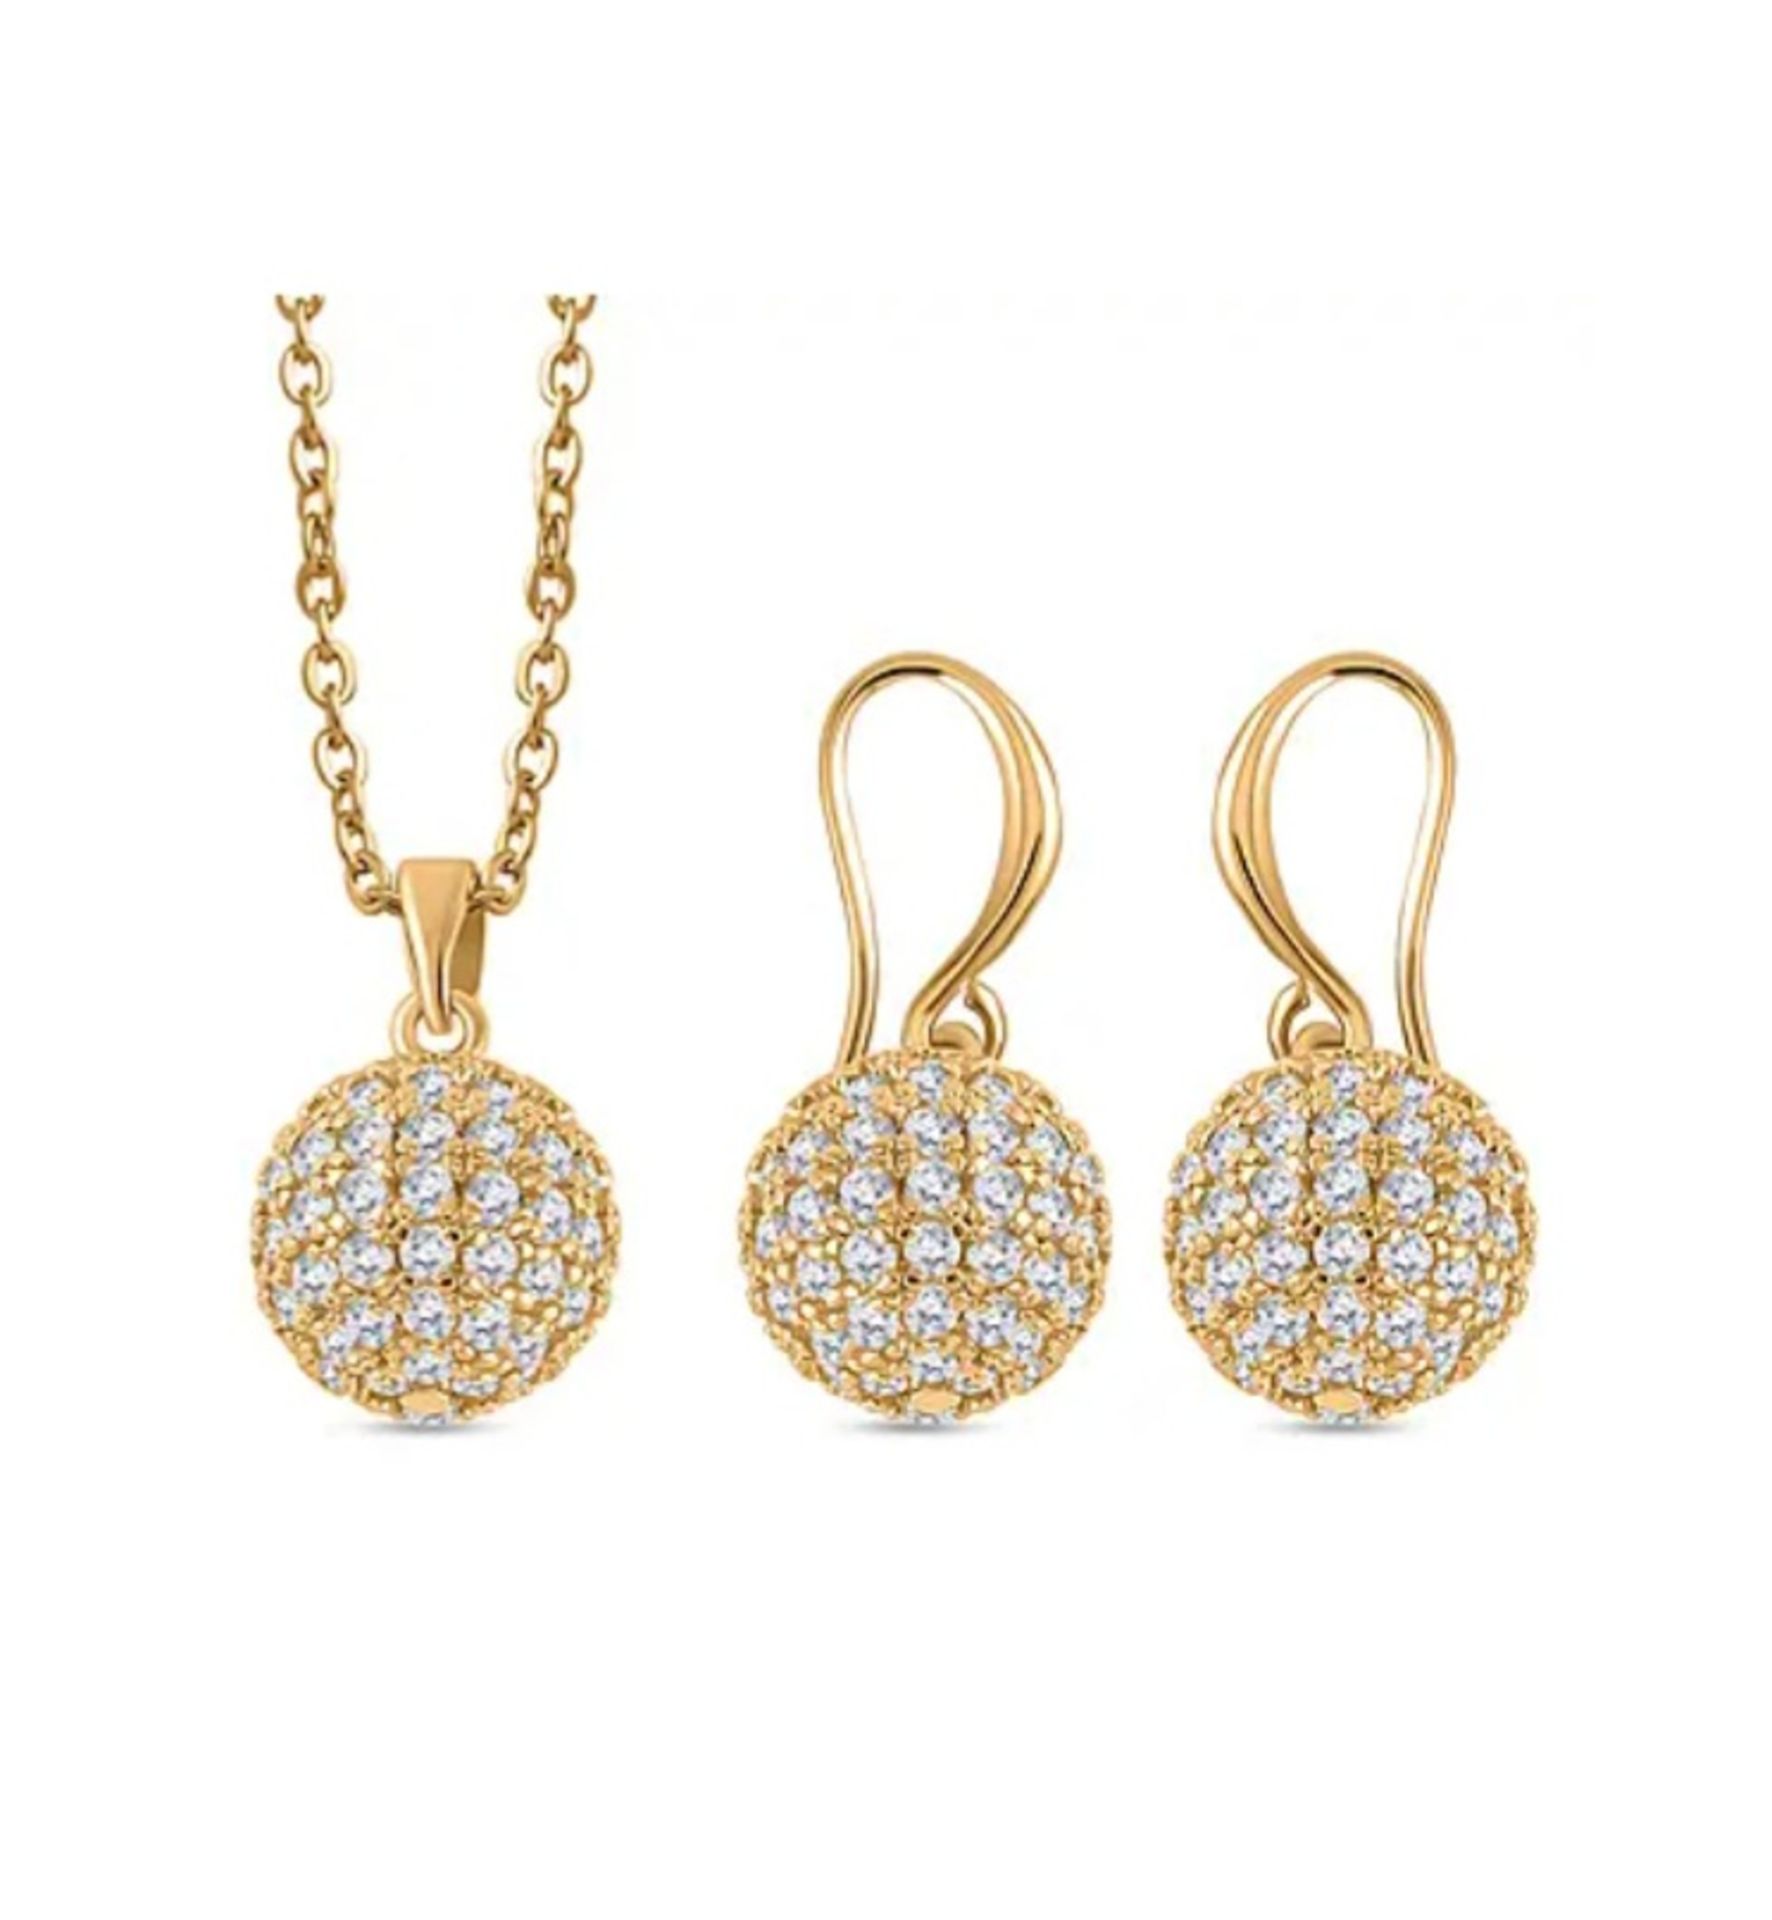 New! 2 Piece Set - Simulated Diamond Cluster Pendant & Earrings - Image 2 of 7